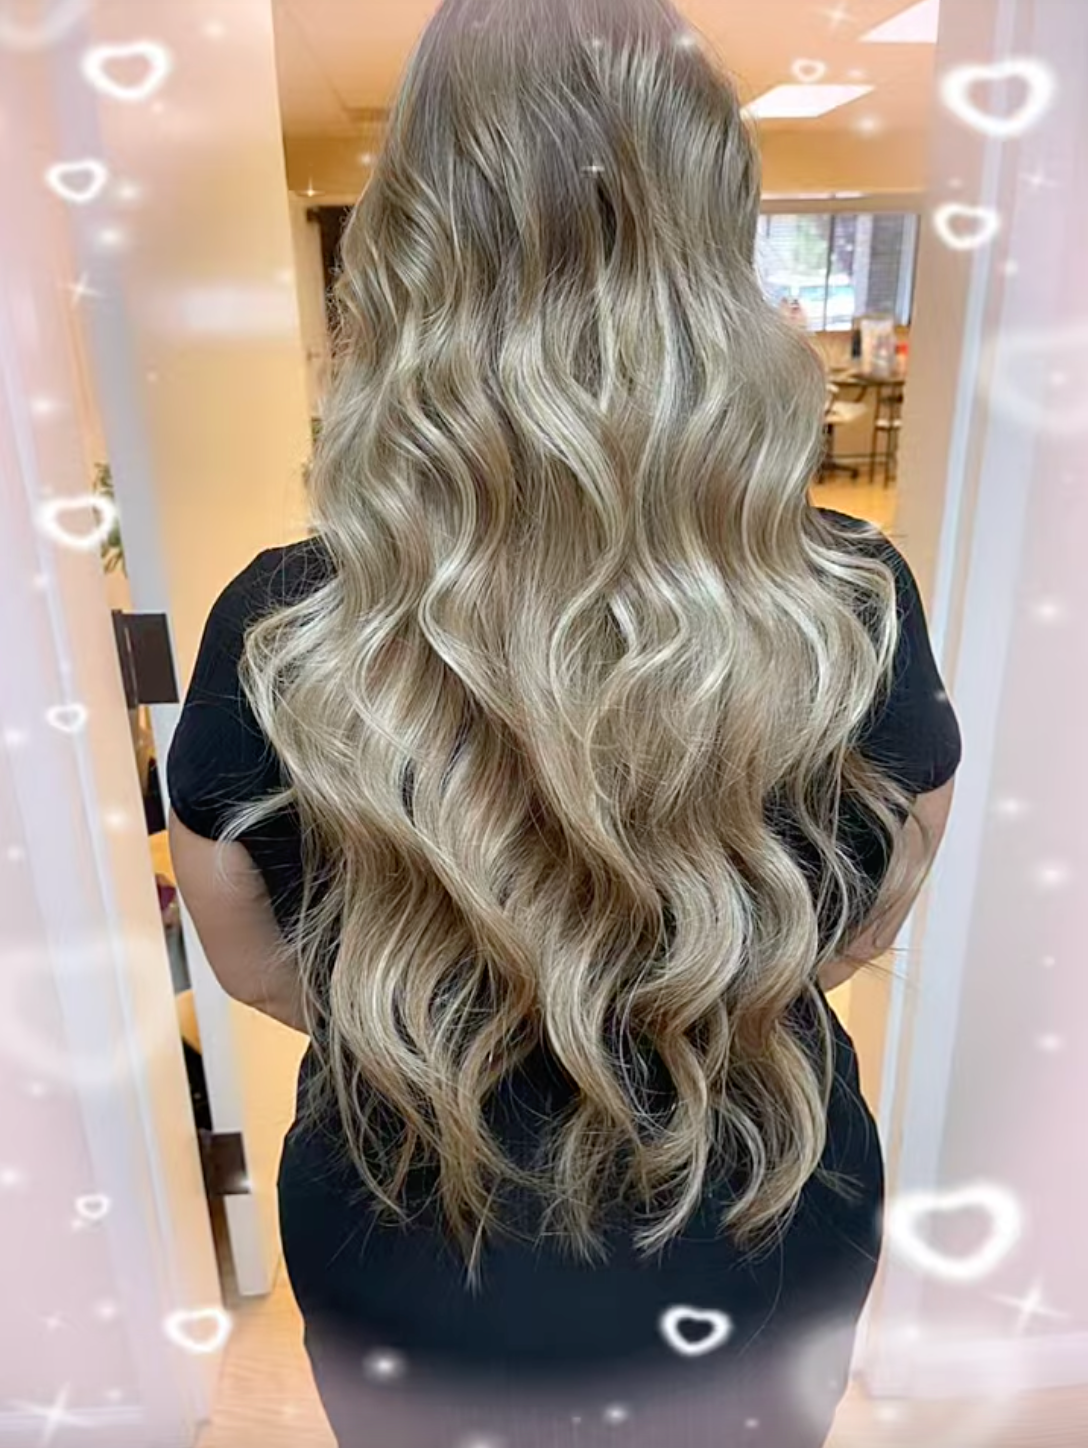 Blonde balayage hair color and extensions by Mane by Crystal Motzkus in Manteca CA